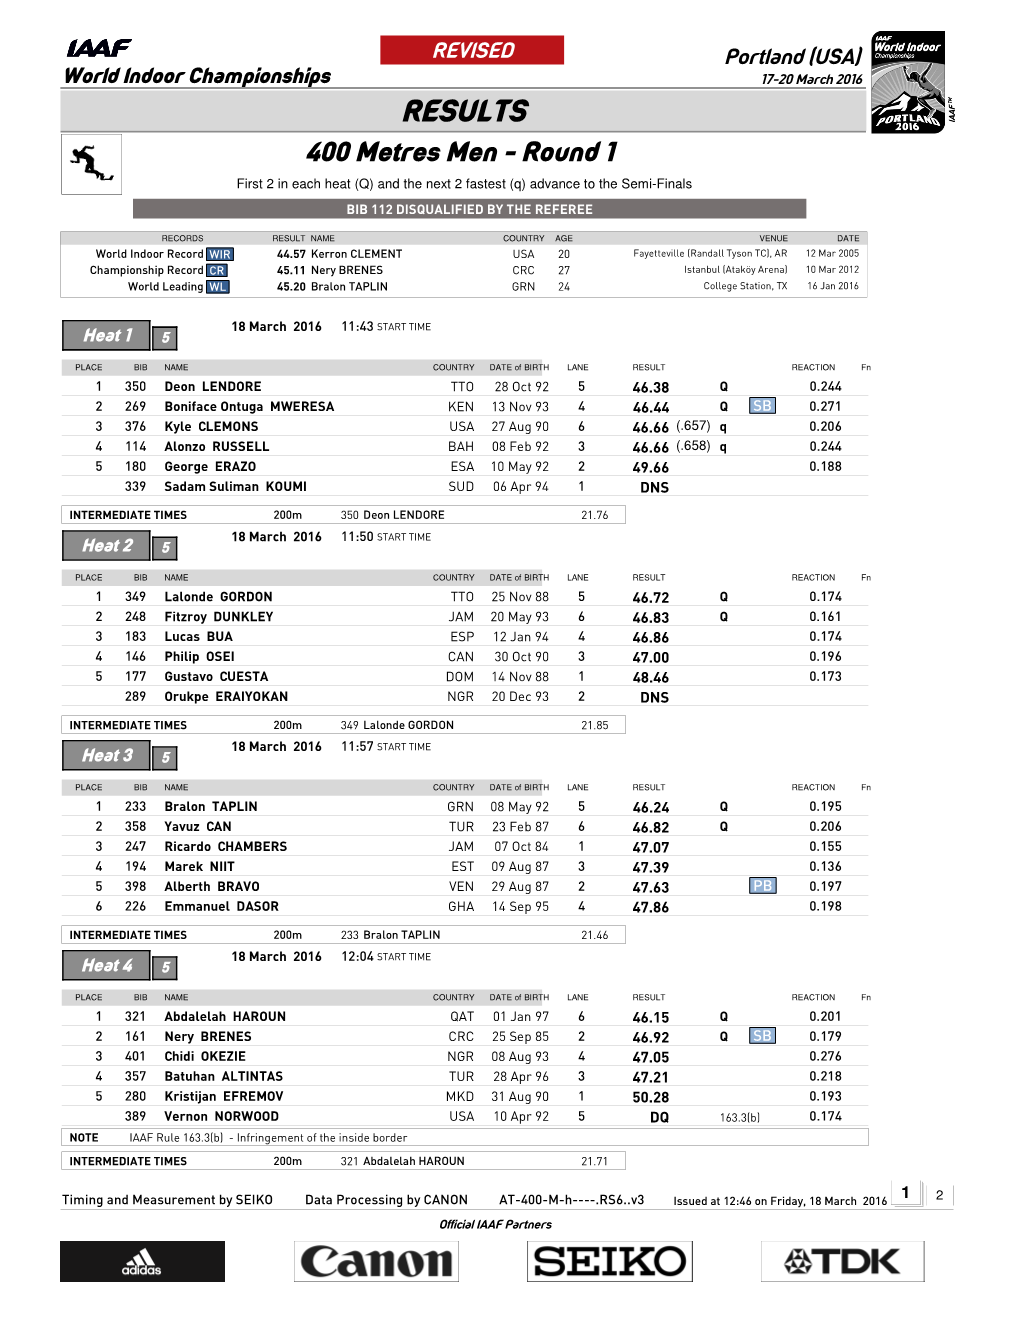 RESULTS 400 Metres Men - Round 1 First 2 in Each Heat (Q) and the Next 2 Fastest (Q) Advance to the Semi-Finals BIB 112 DISQUALIFIED by the REFEREE